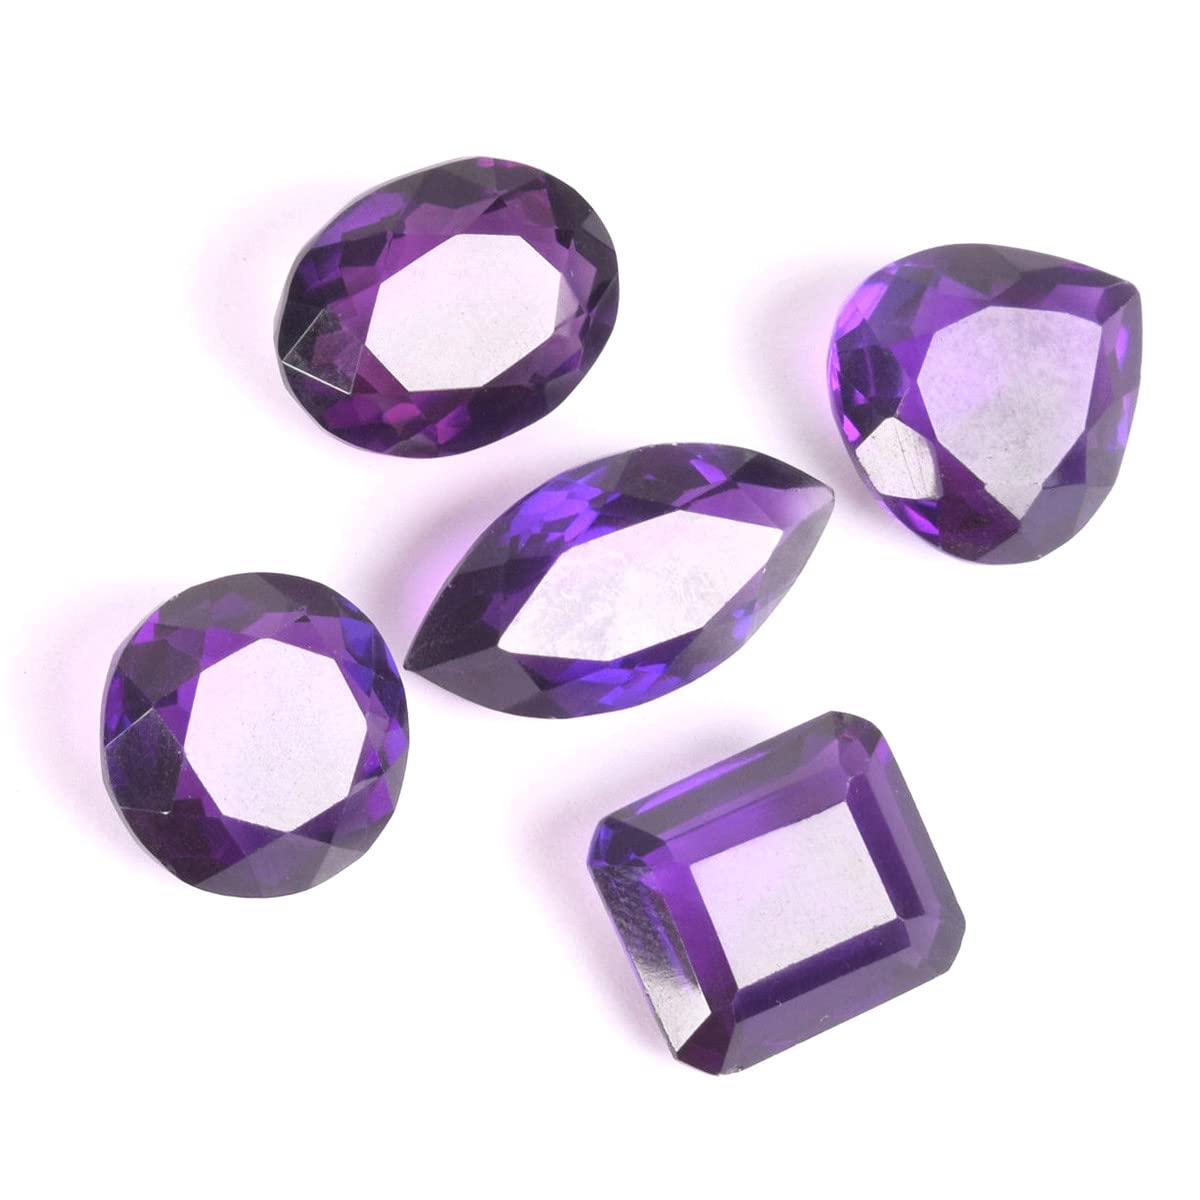 Violet gems exude a sense of elegance and mystique, making them a popular choice for jewelry lovers seeking a touch of sophistication in their accessories.